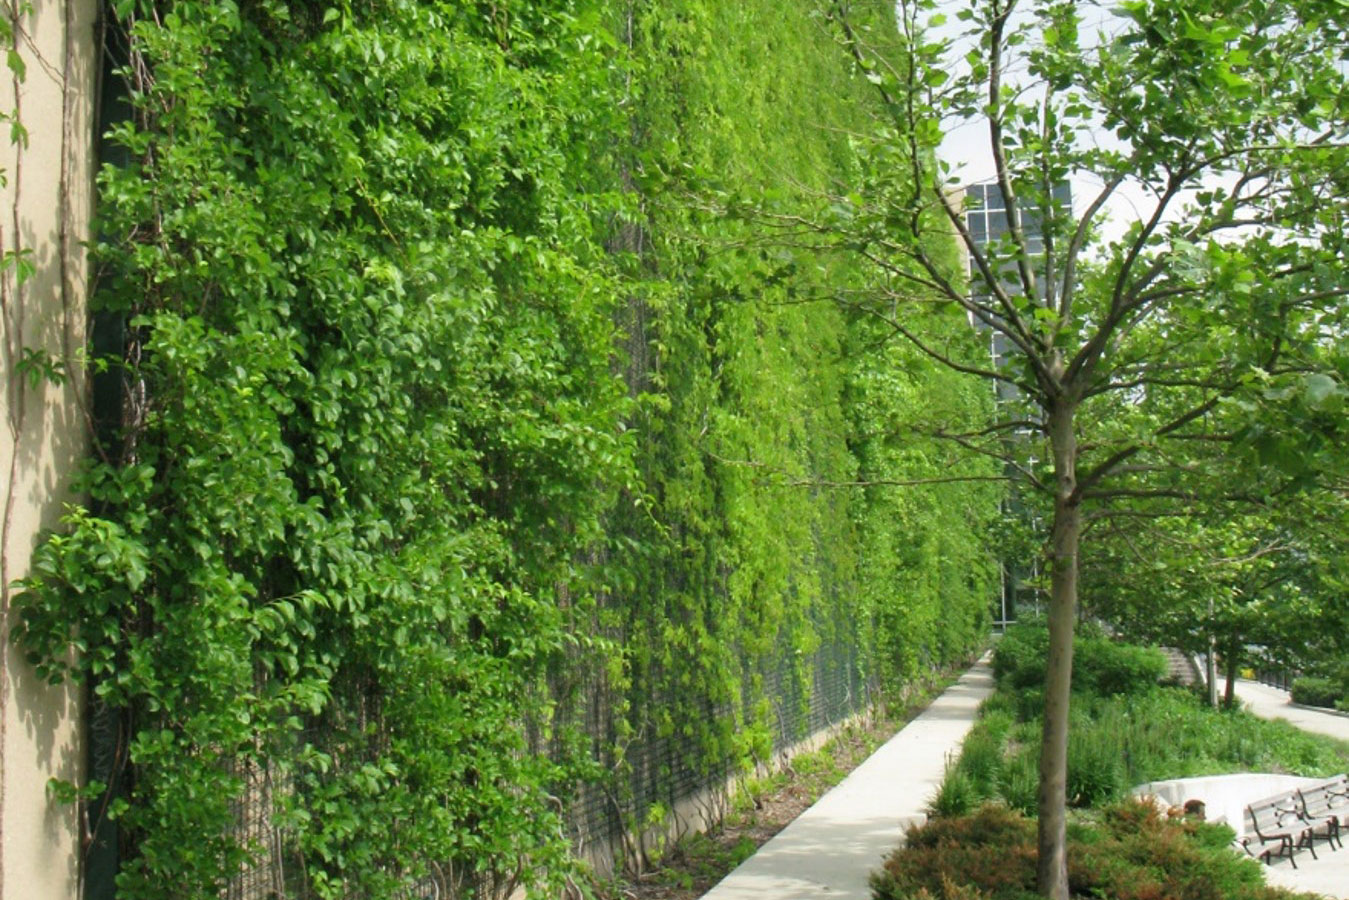 The History of Green Infrastructure